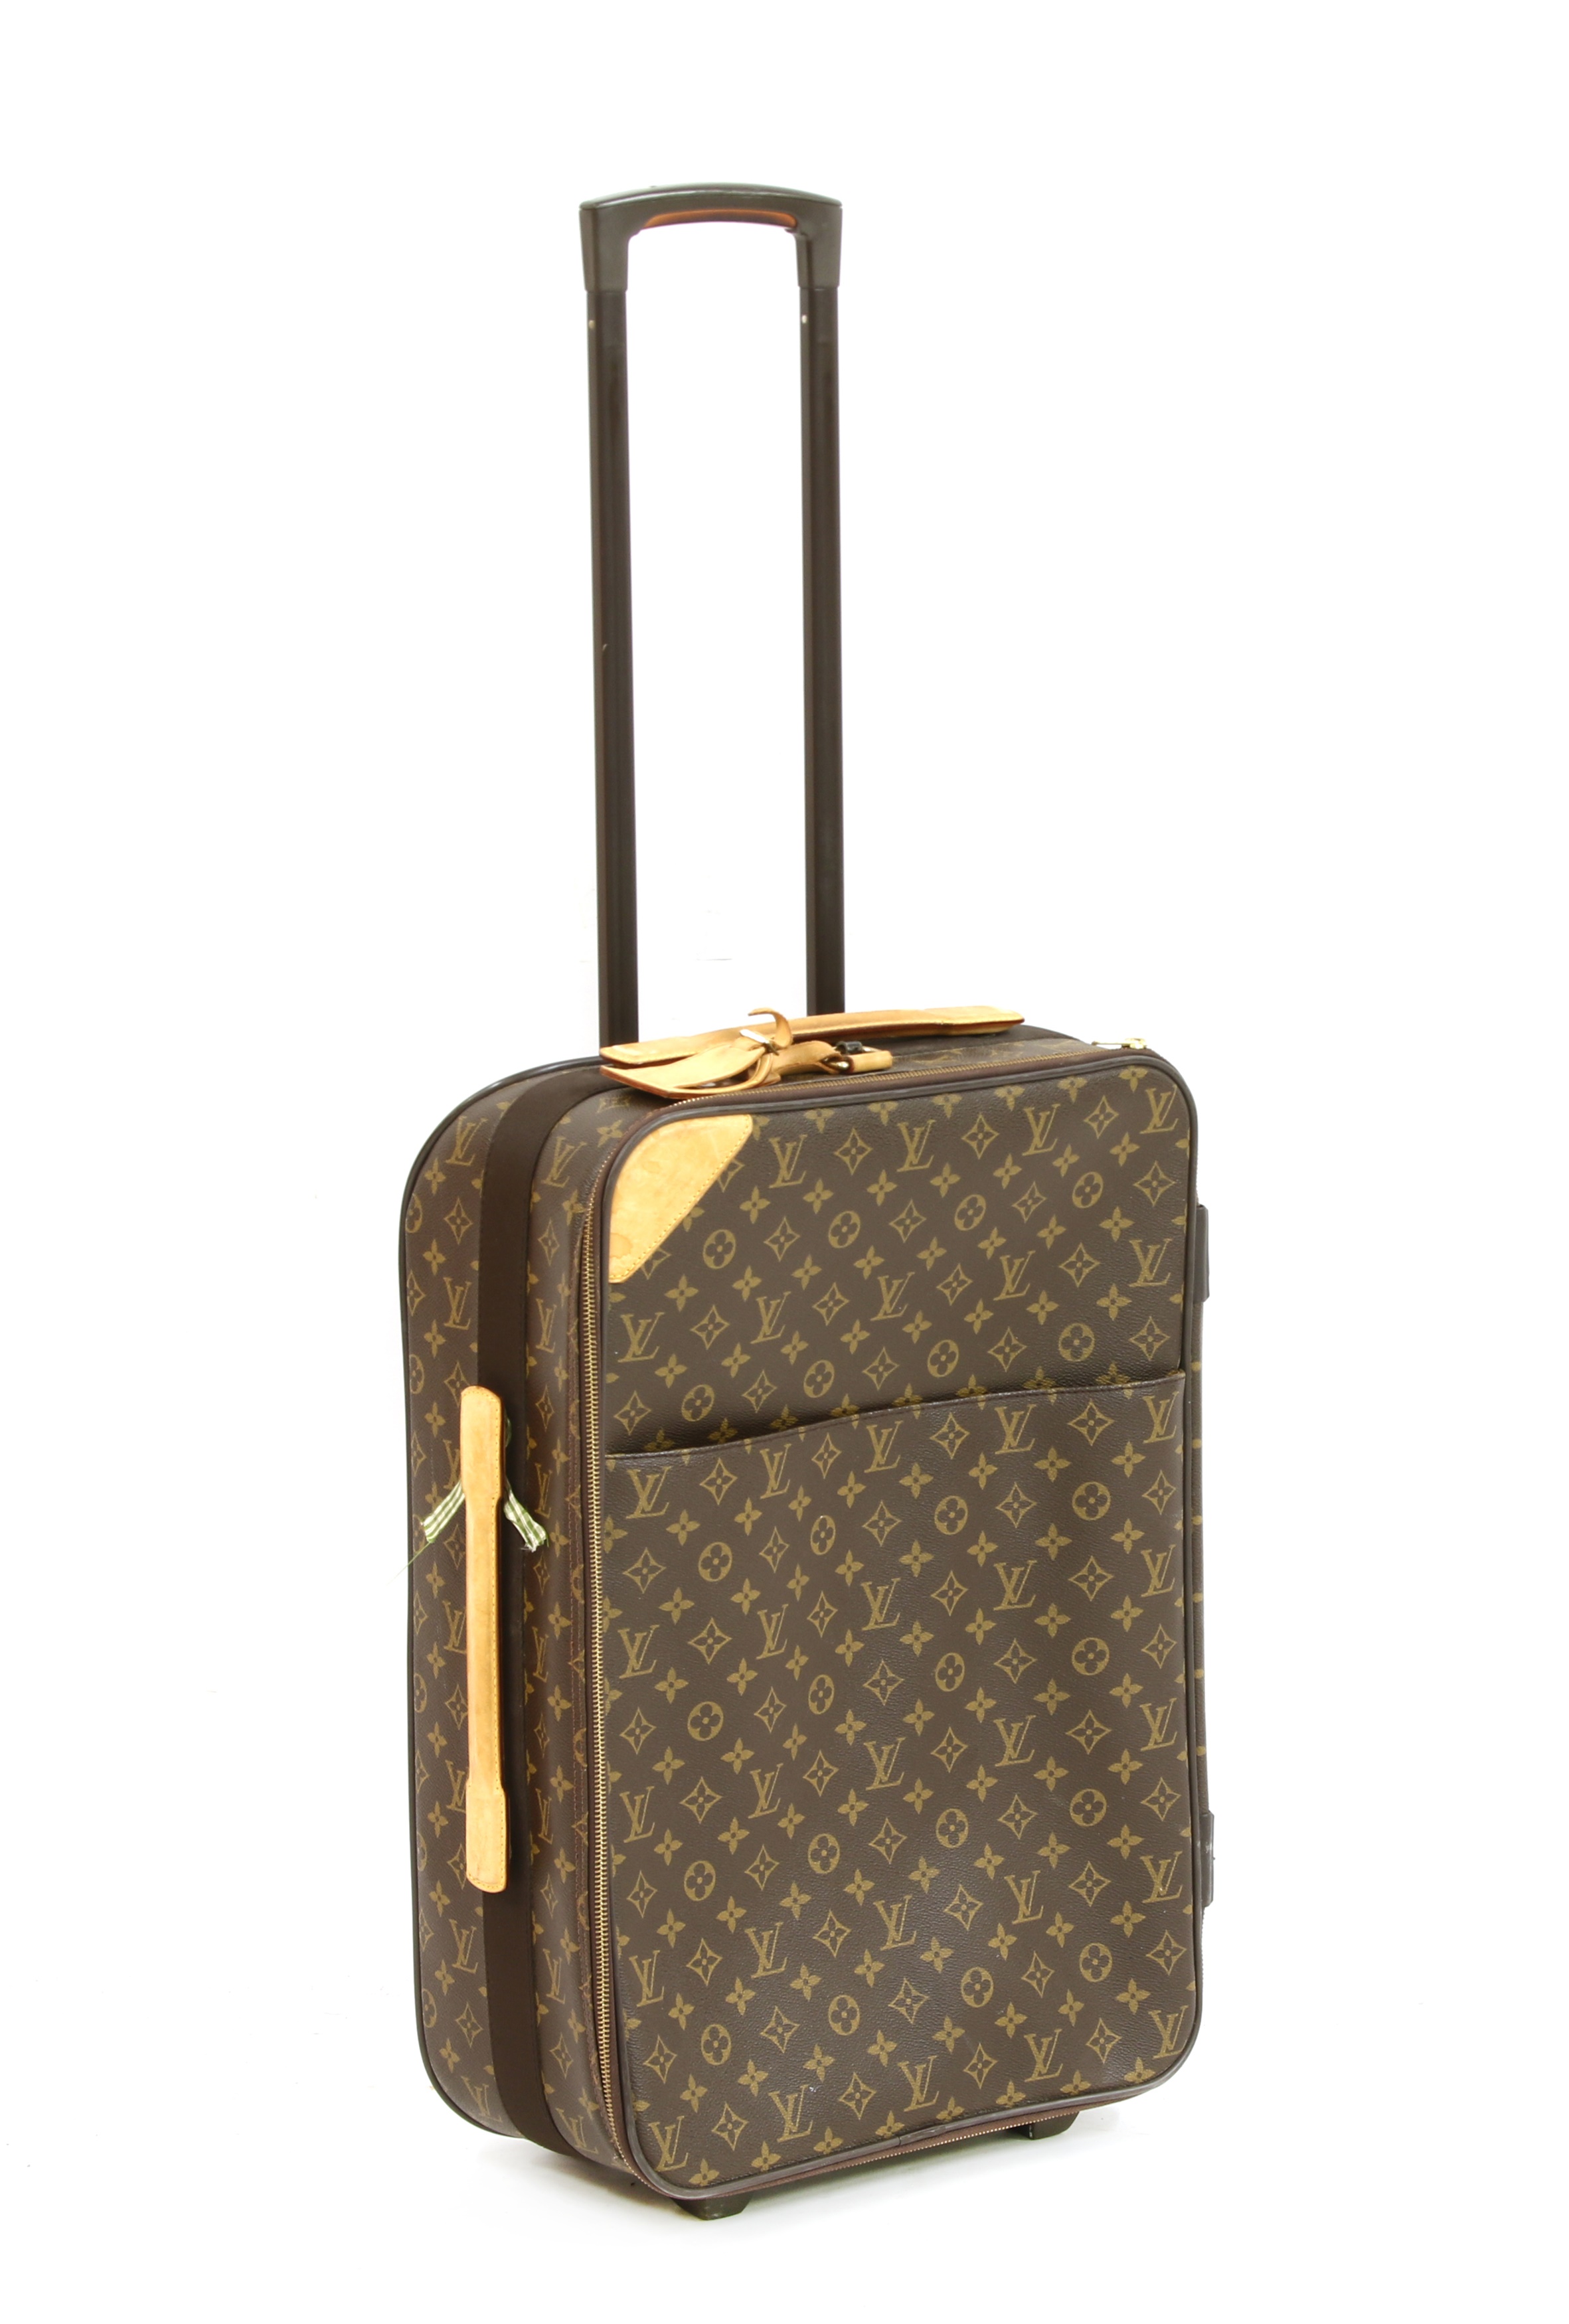 Extra Large Vintage Louis Vuitton Suitcase in Antique Luggage & Bags